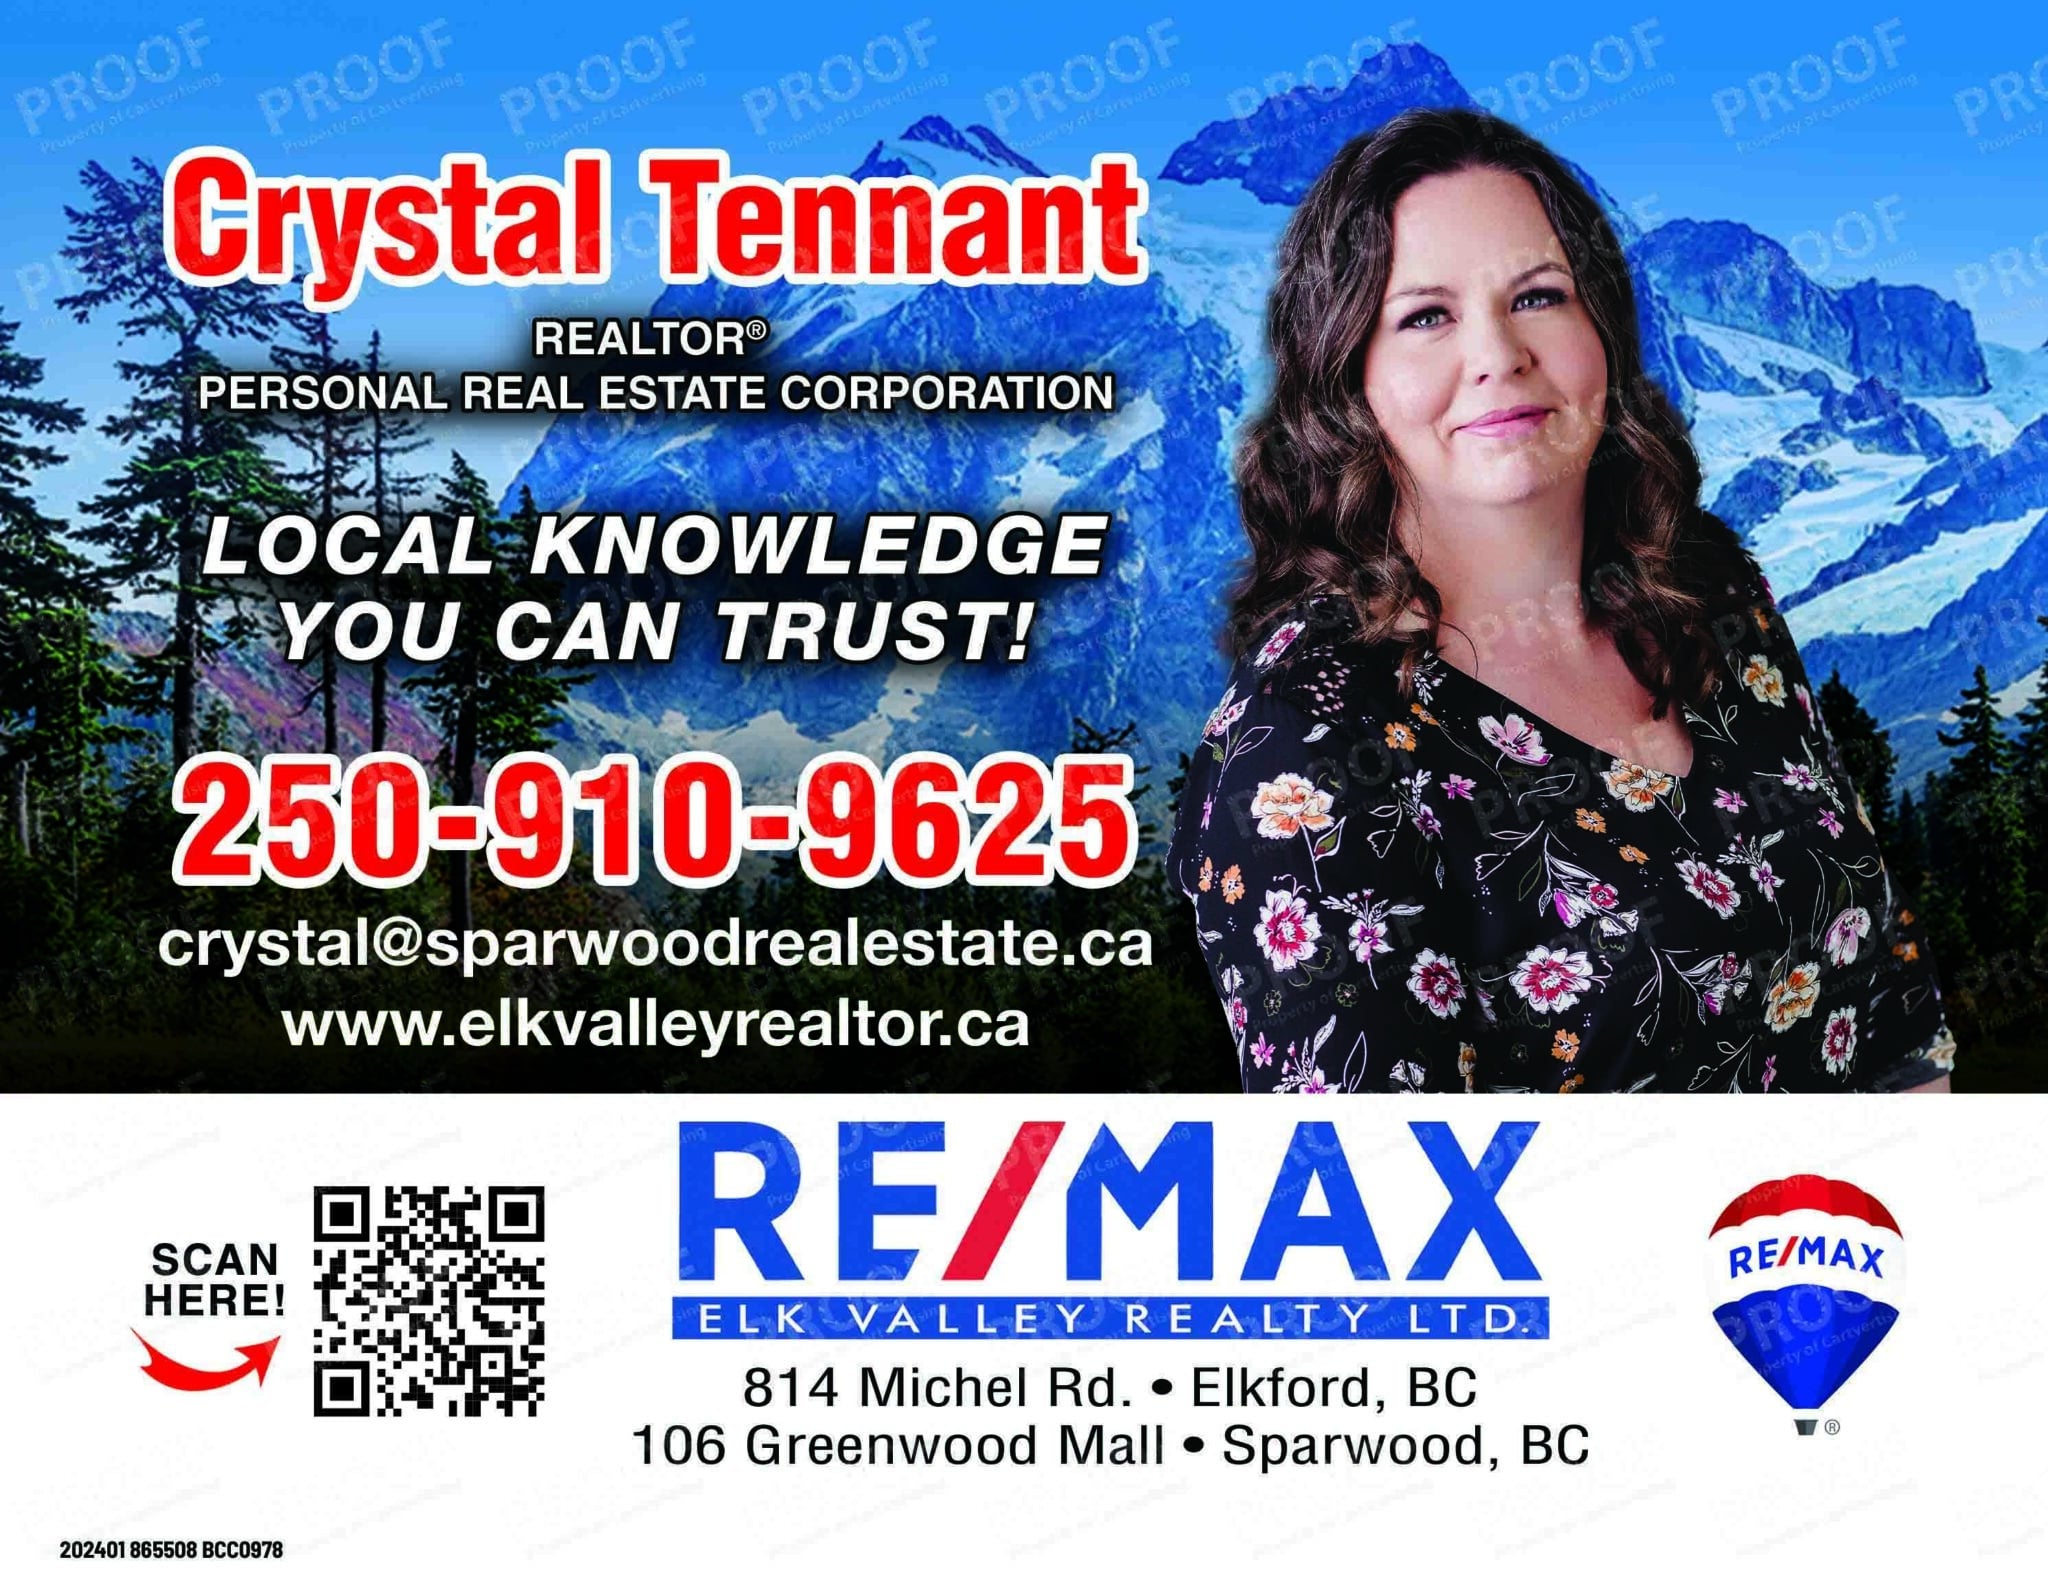 Crystal Tennant Personal Real Estate Corporation RE/MAX Elk Valley Realty